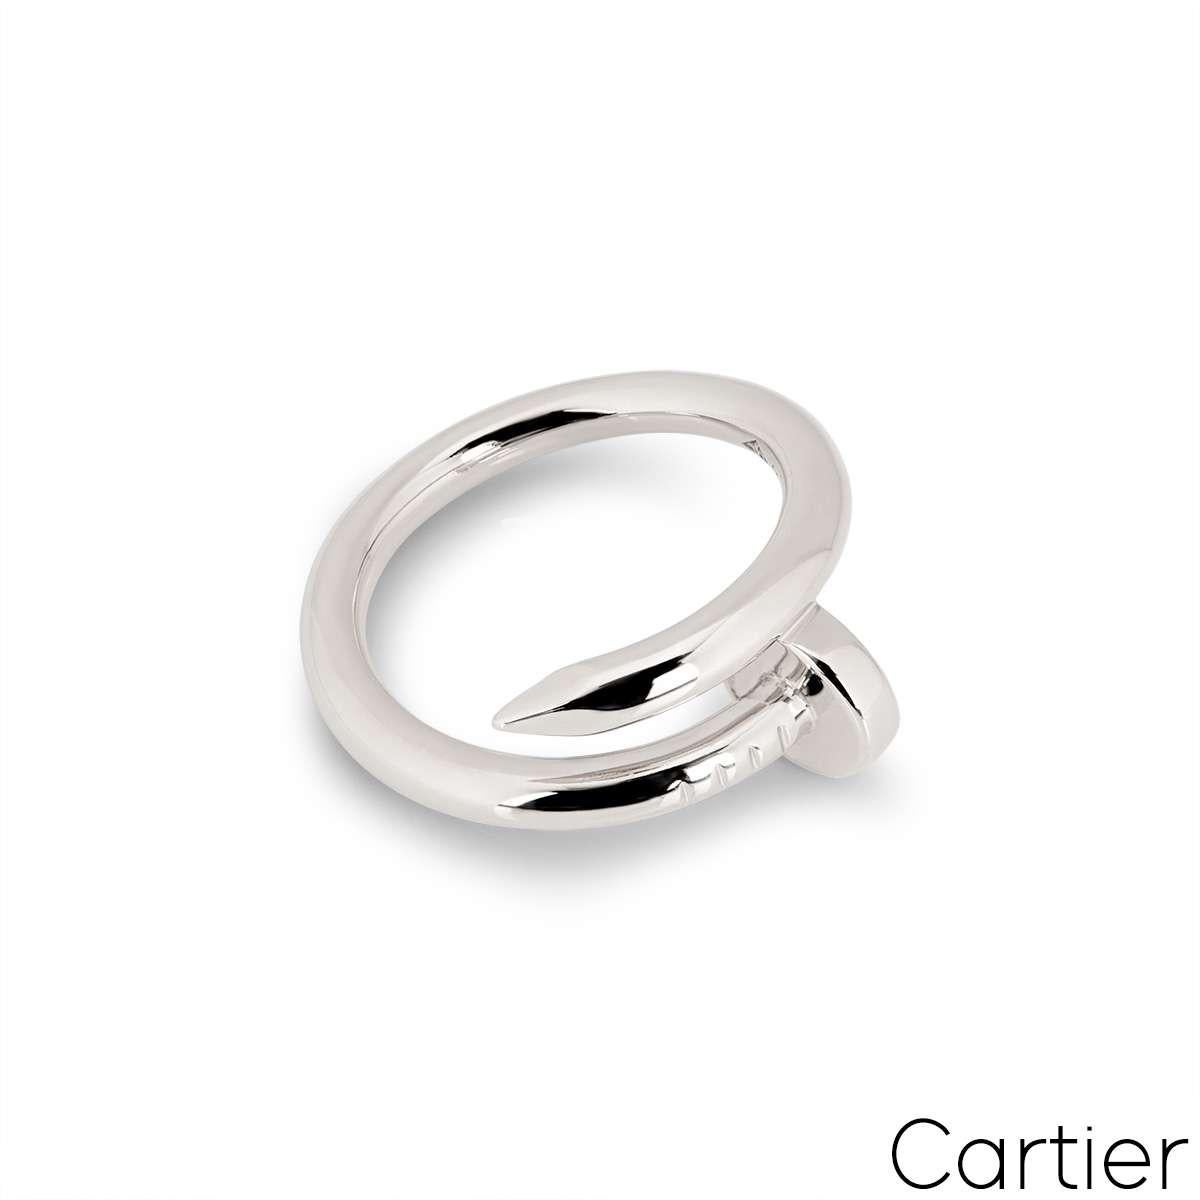 Cartier White Gold Plain Juste un Clou Ring Size 56 B4099200 In Excellent Condition For Sale In London, GB